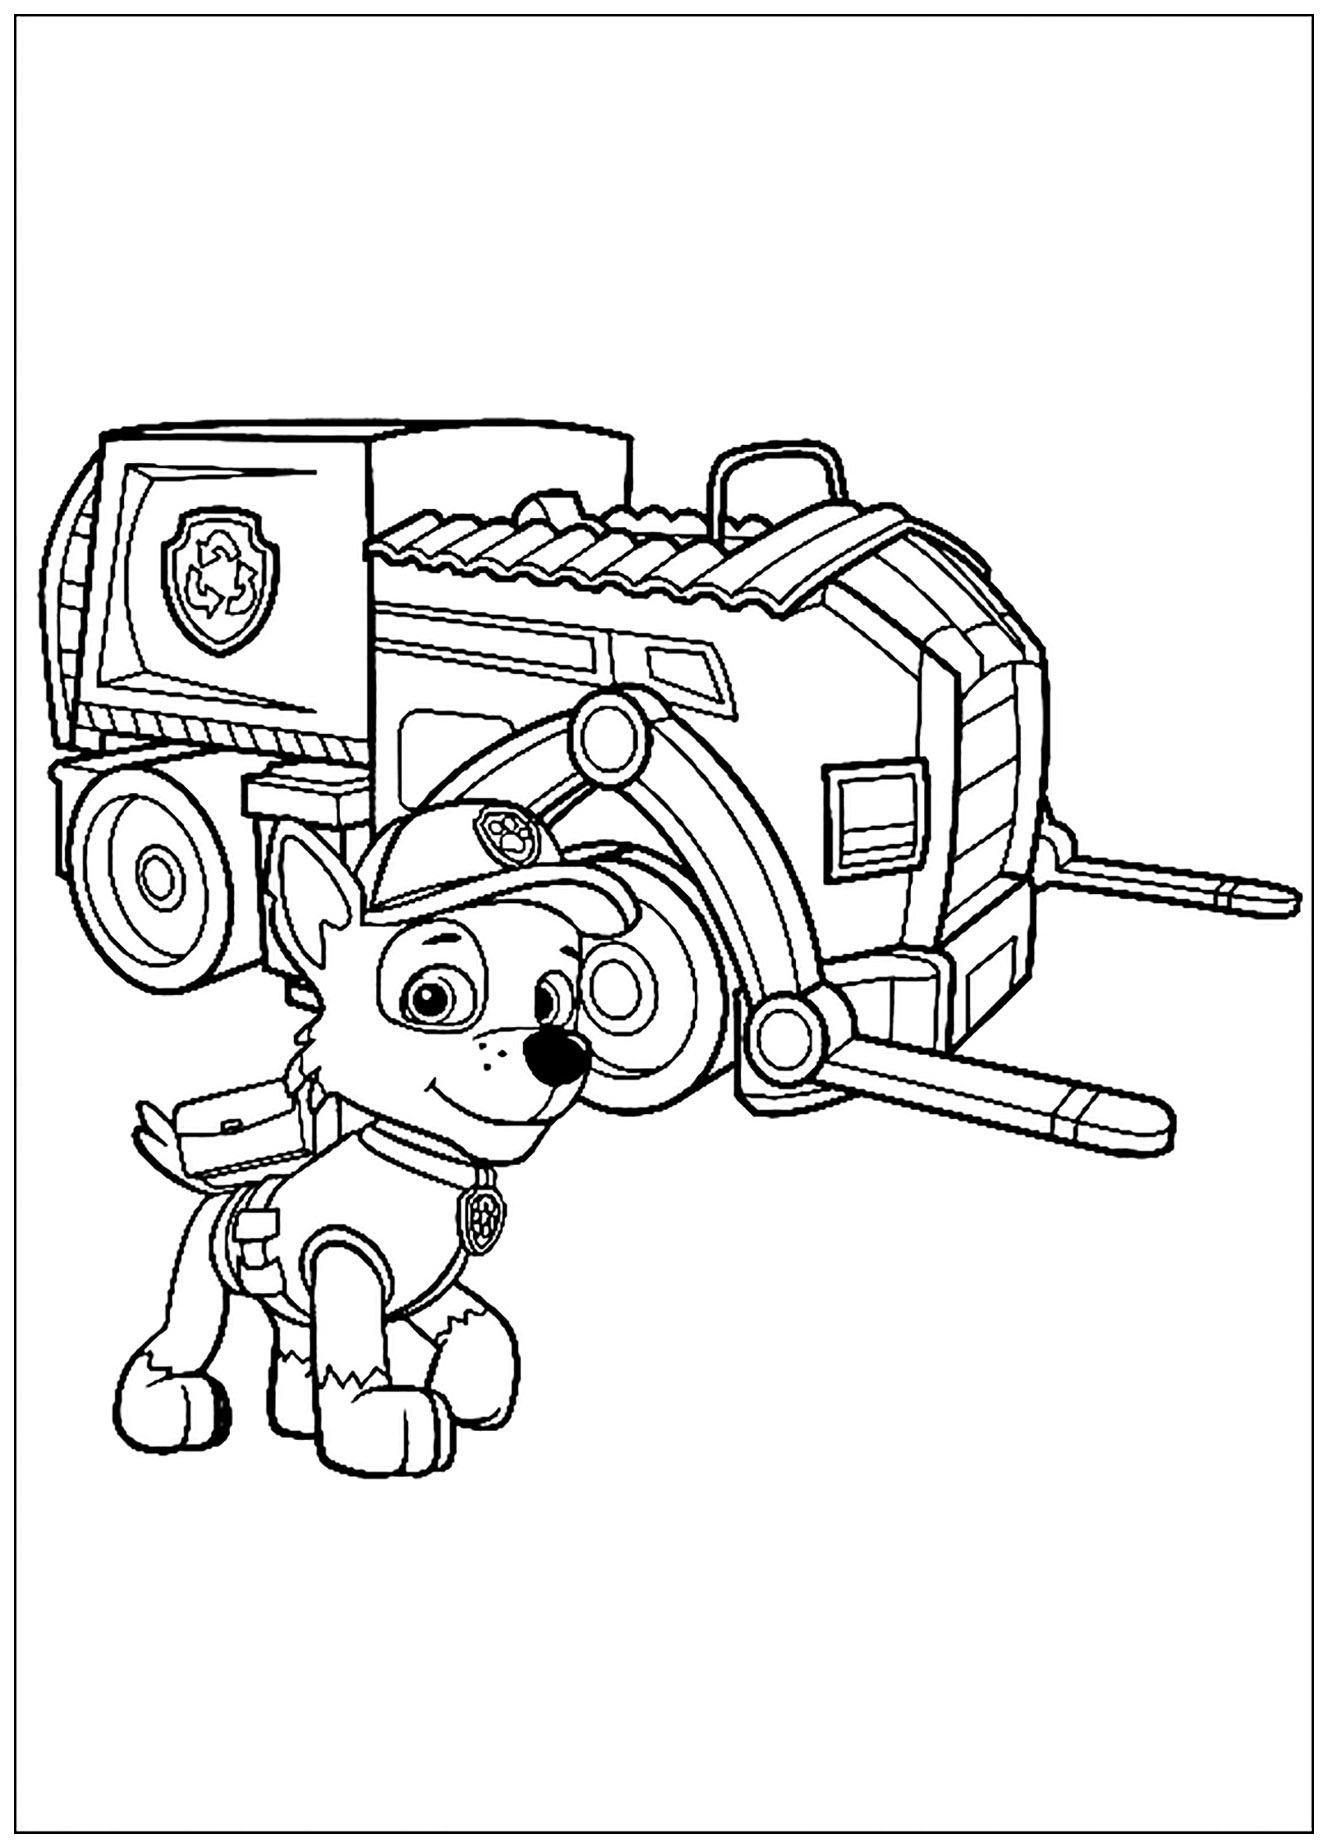 Paw patrol to color for kids